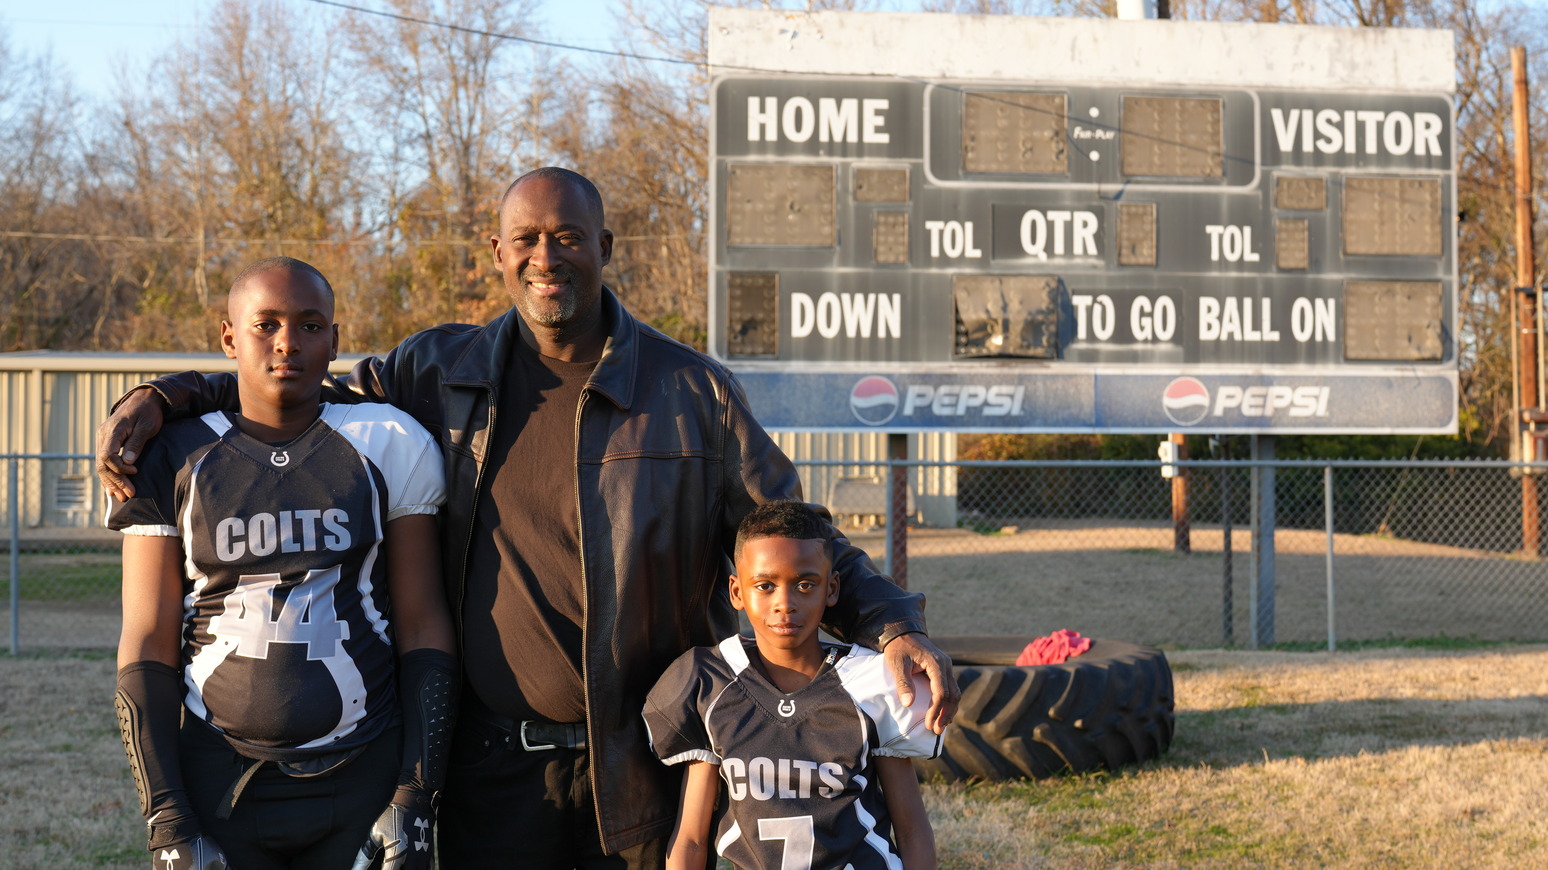 Ronald Redmond (center) stands on a football field in Lexington, Mississippi, where his sons, 11-year-old R.J. (left) and seven-year-old Mason (right), play for the Lexington Colts youth football team. Photo by Jenna Bloom/University of Maryland.